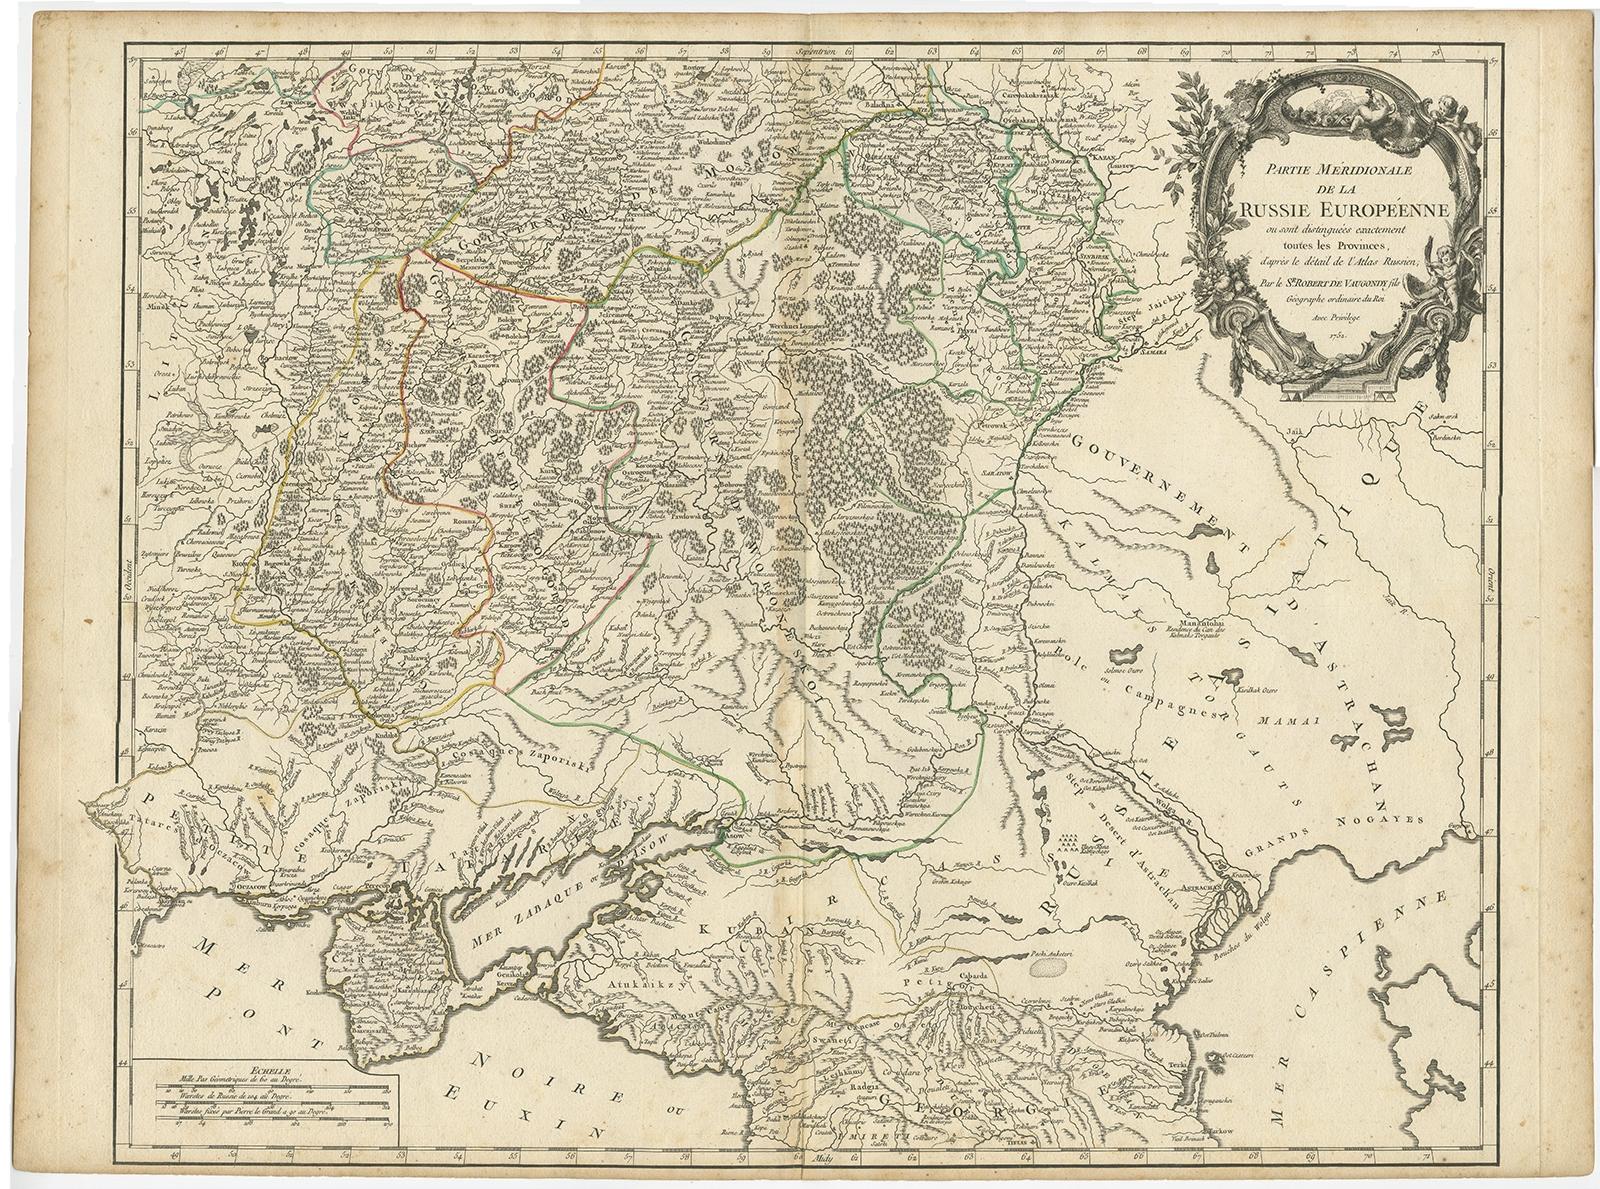 Antique map titled 'Partie meridionale de la Russie Européenne'. 

Detailed map of the southern part of European Russia by Robert de Vaugondy. It covers from Moscow south to Georgia and from Poland east to the Volga River, including Crimea and